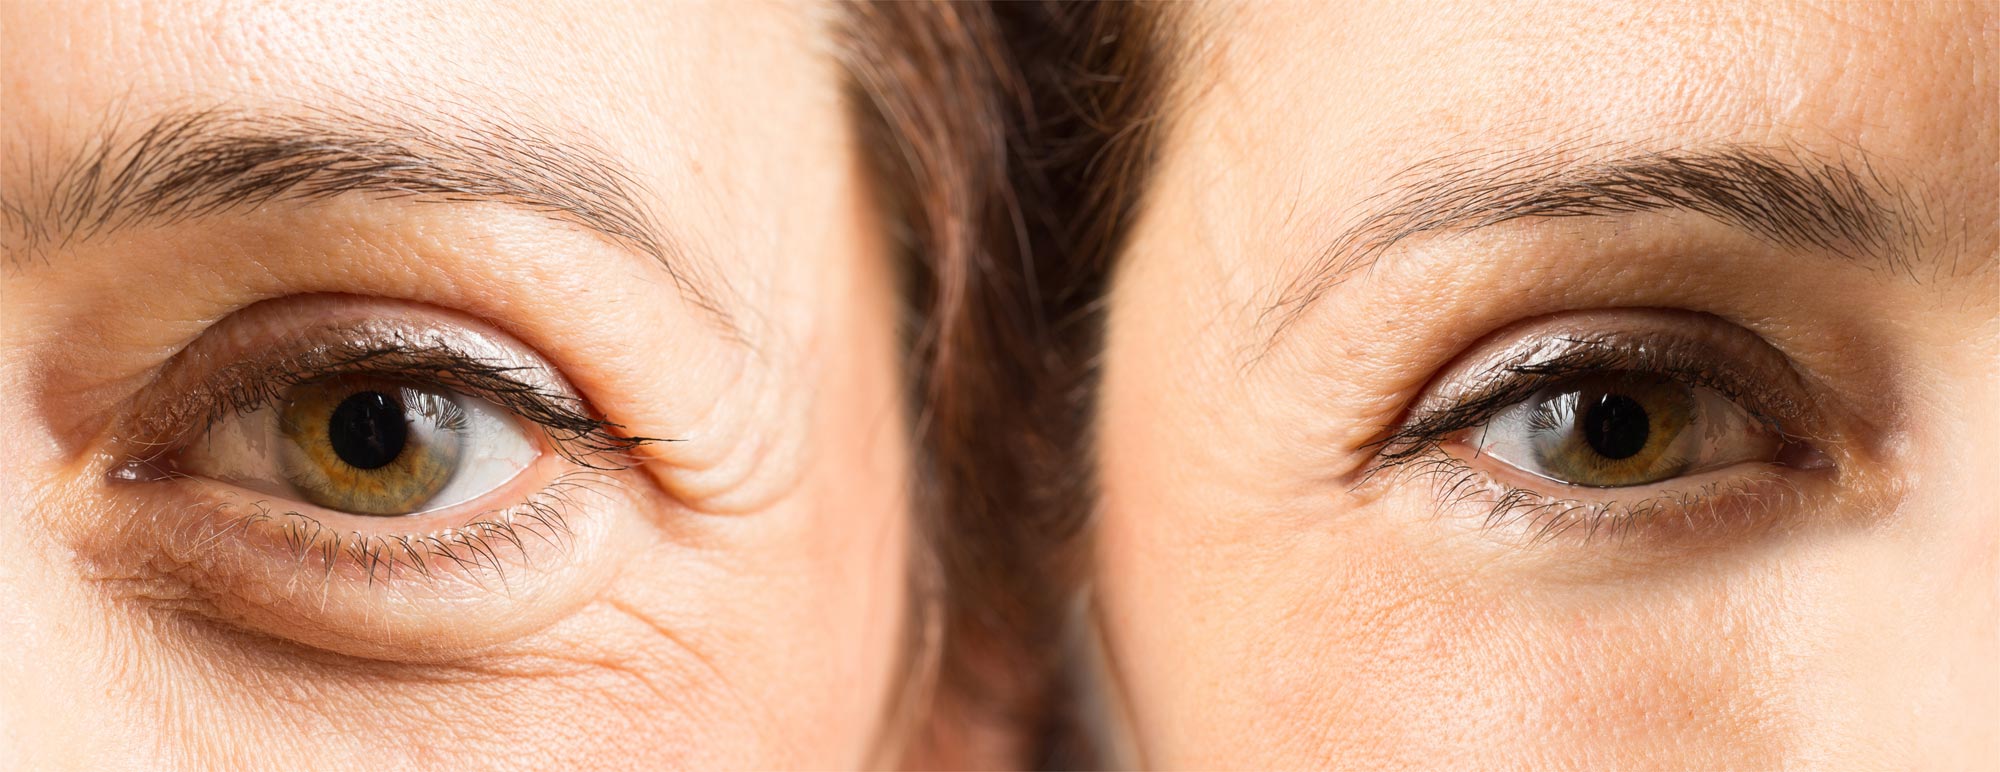 crow's feet lines, anti-wrinkle injections